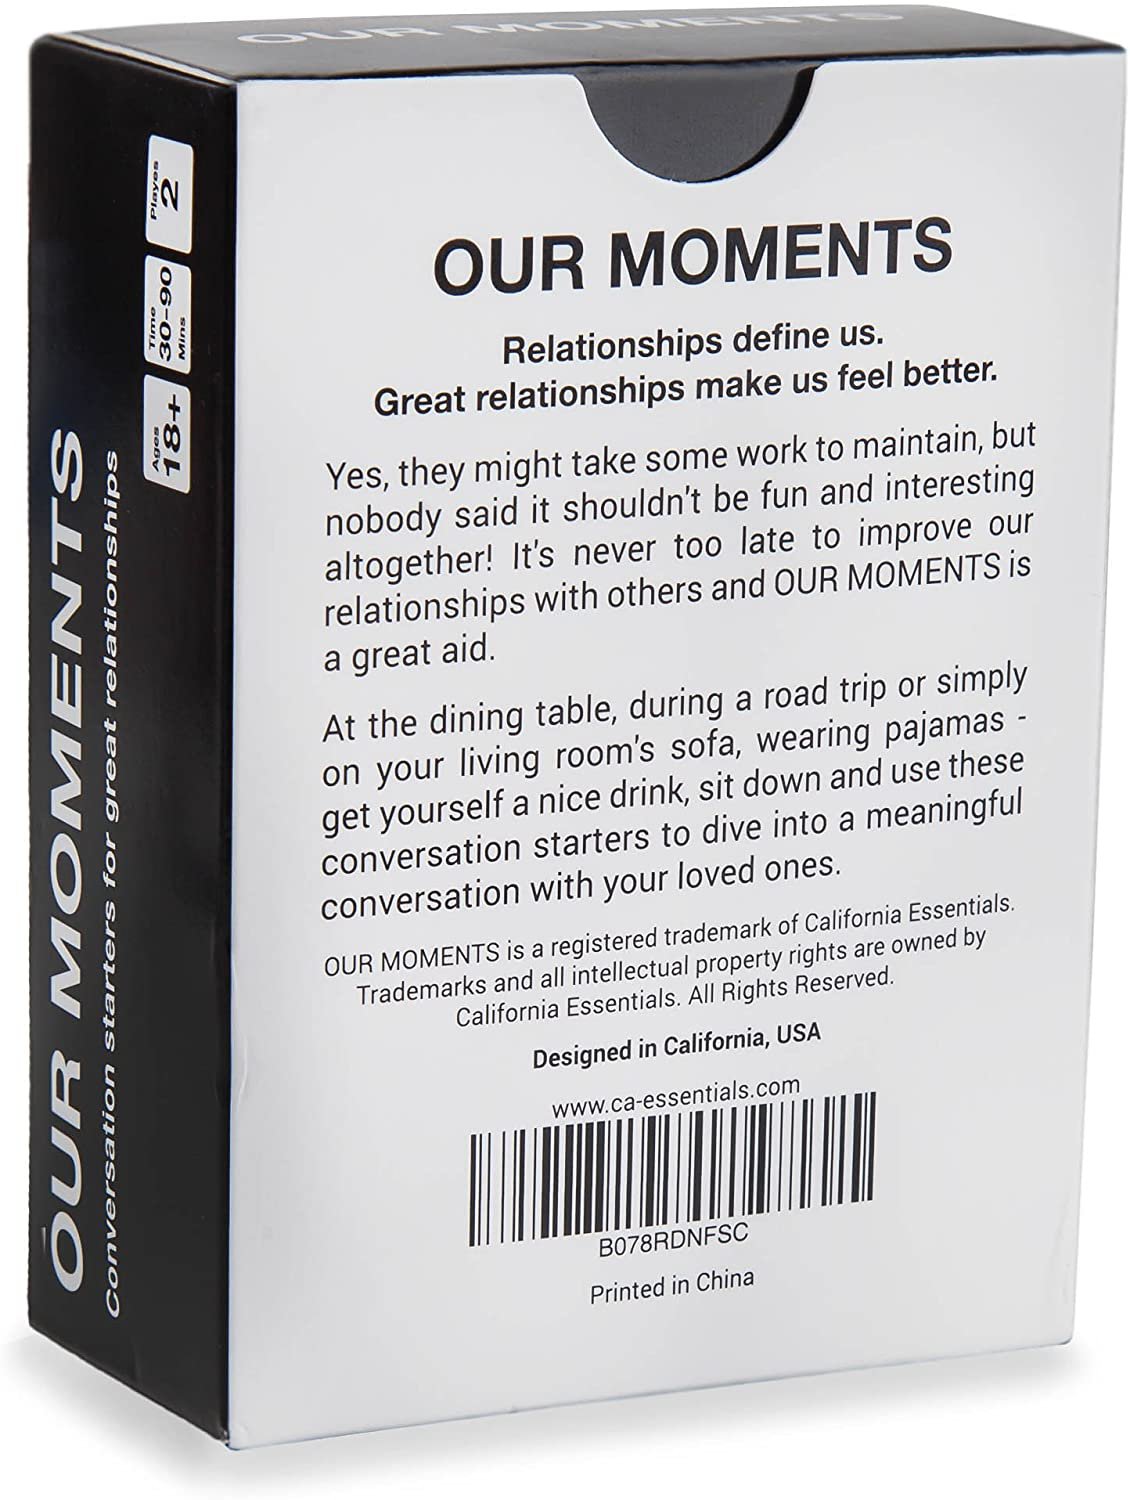 our moments couples cards pdf